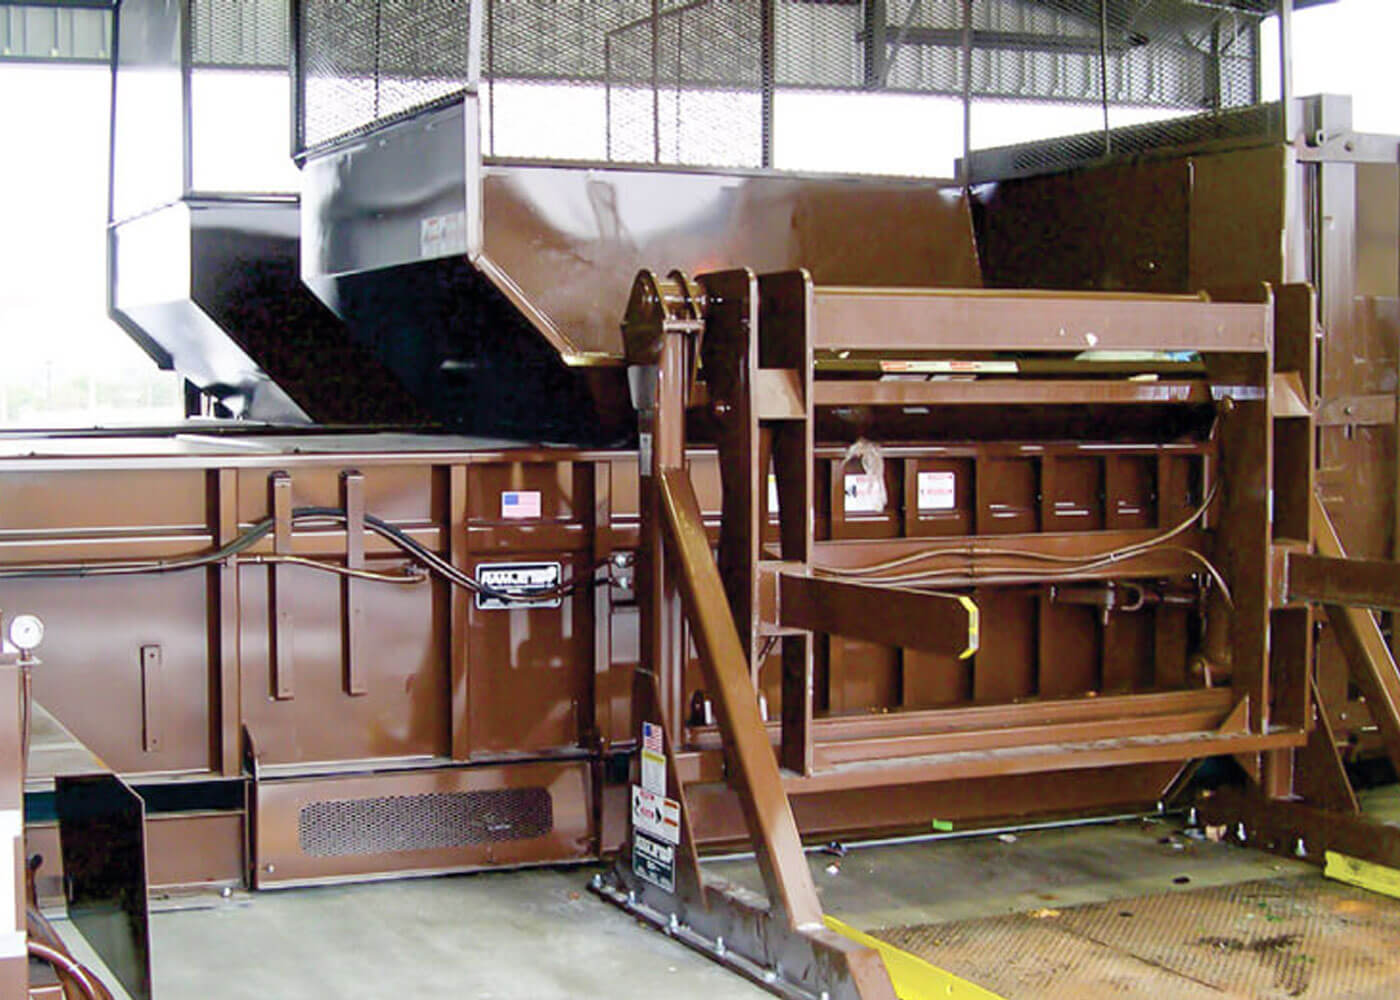 RJ-575 commercial stationary trash compactors with hydraulic lift